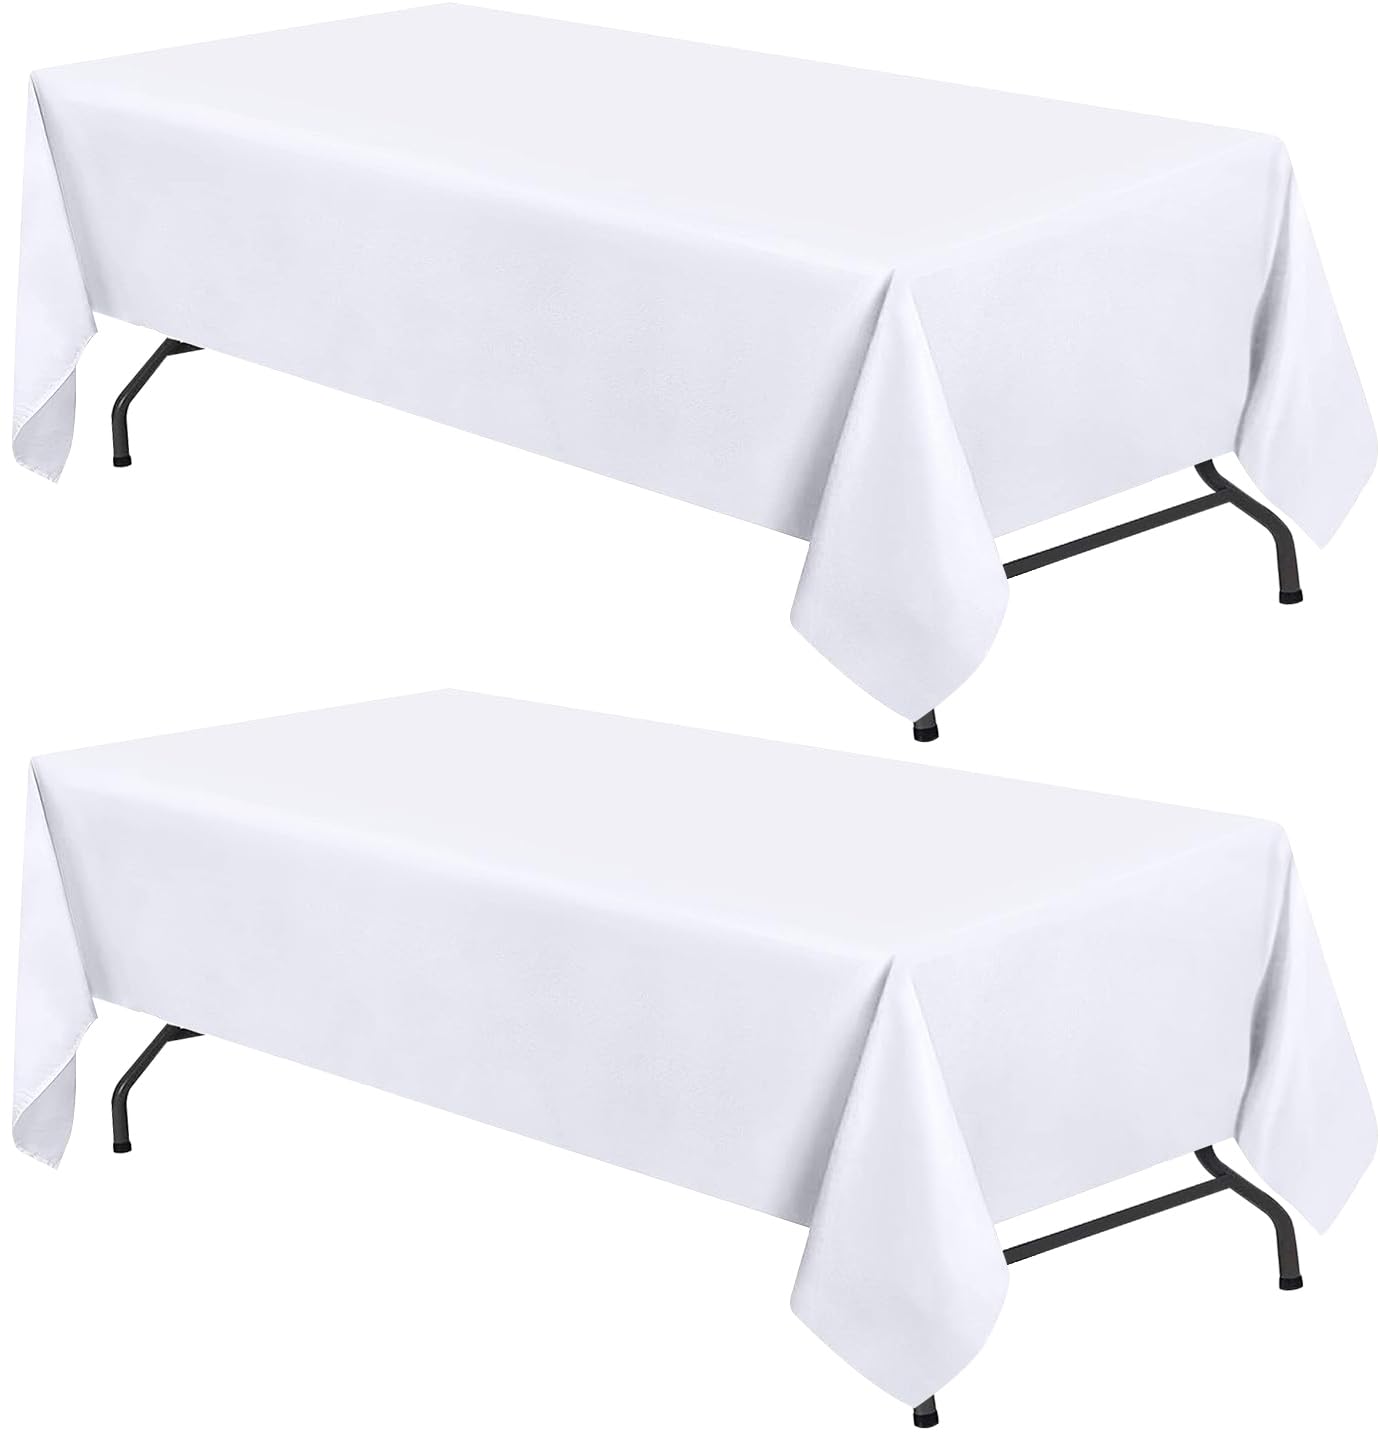 WEALUXE White Table Cloths for 6 Foot Folding Tables [2 Pack, 60x102 Inches] White Tablecloths Rectangular, Stain and Wrinkle Resistant Washable Linen Fabric Cloth  - Acceptable